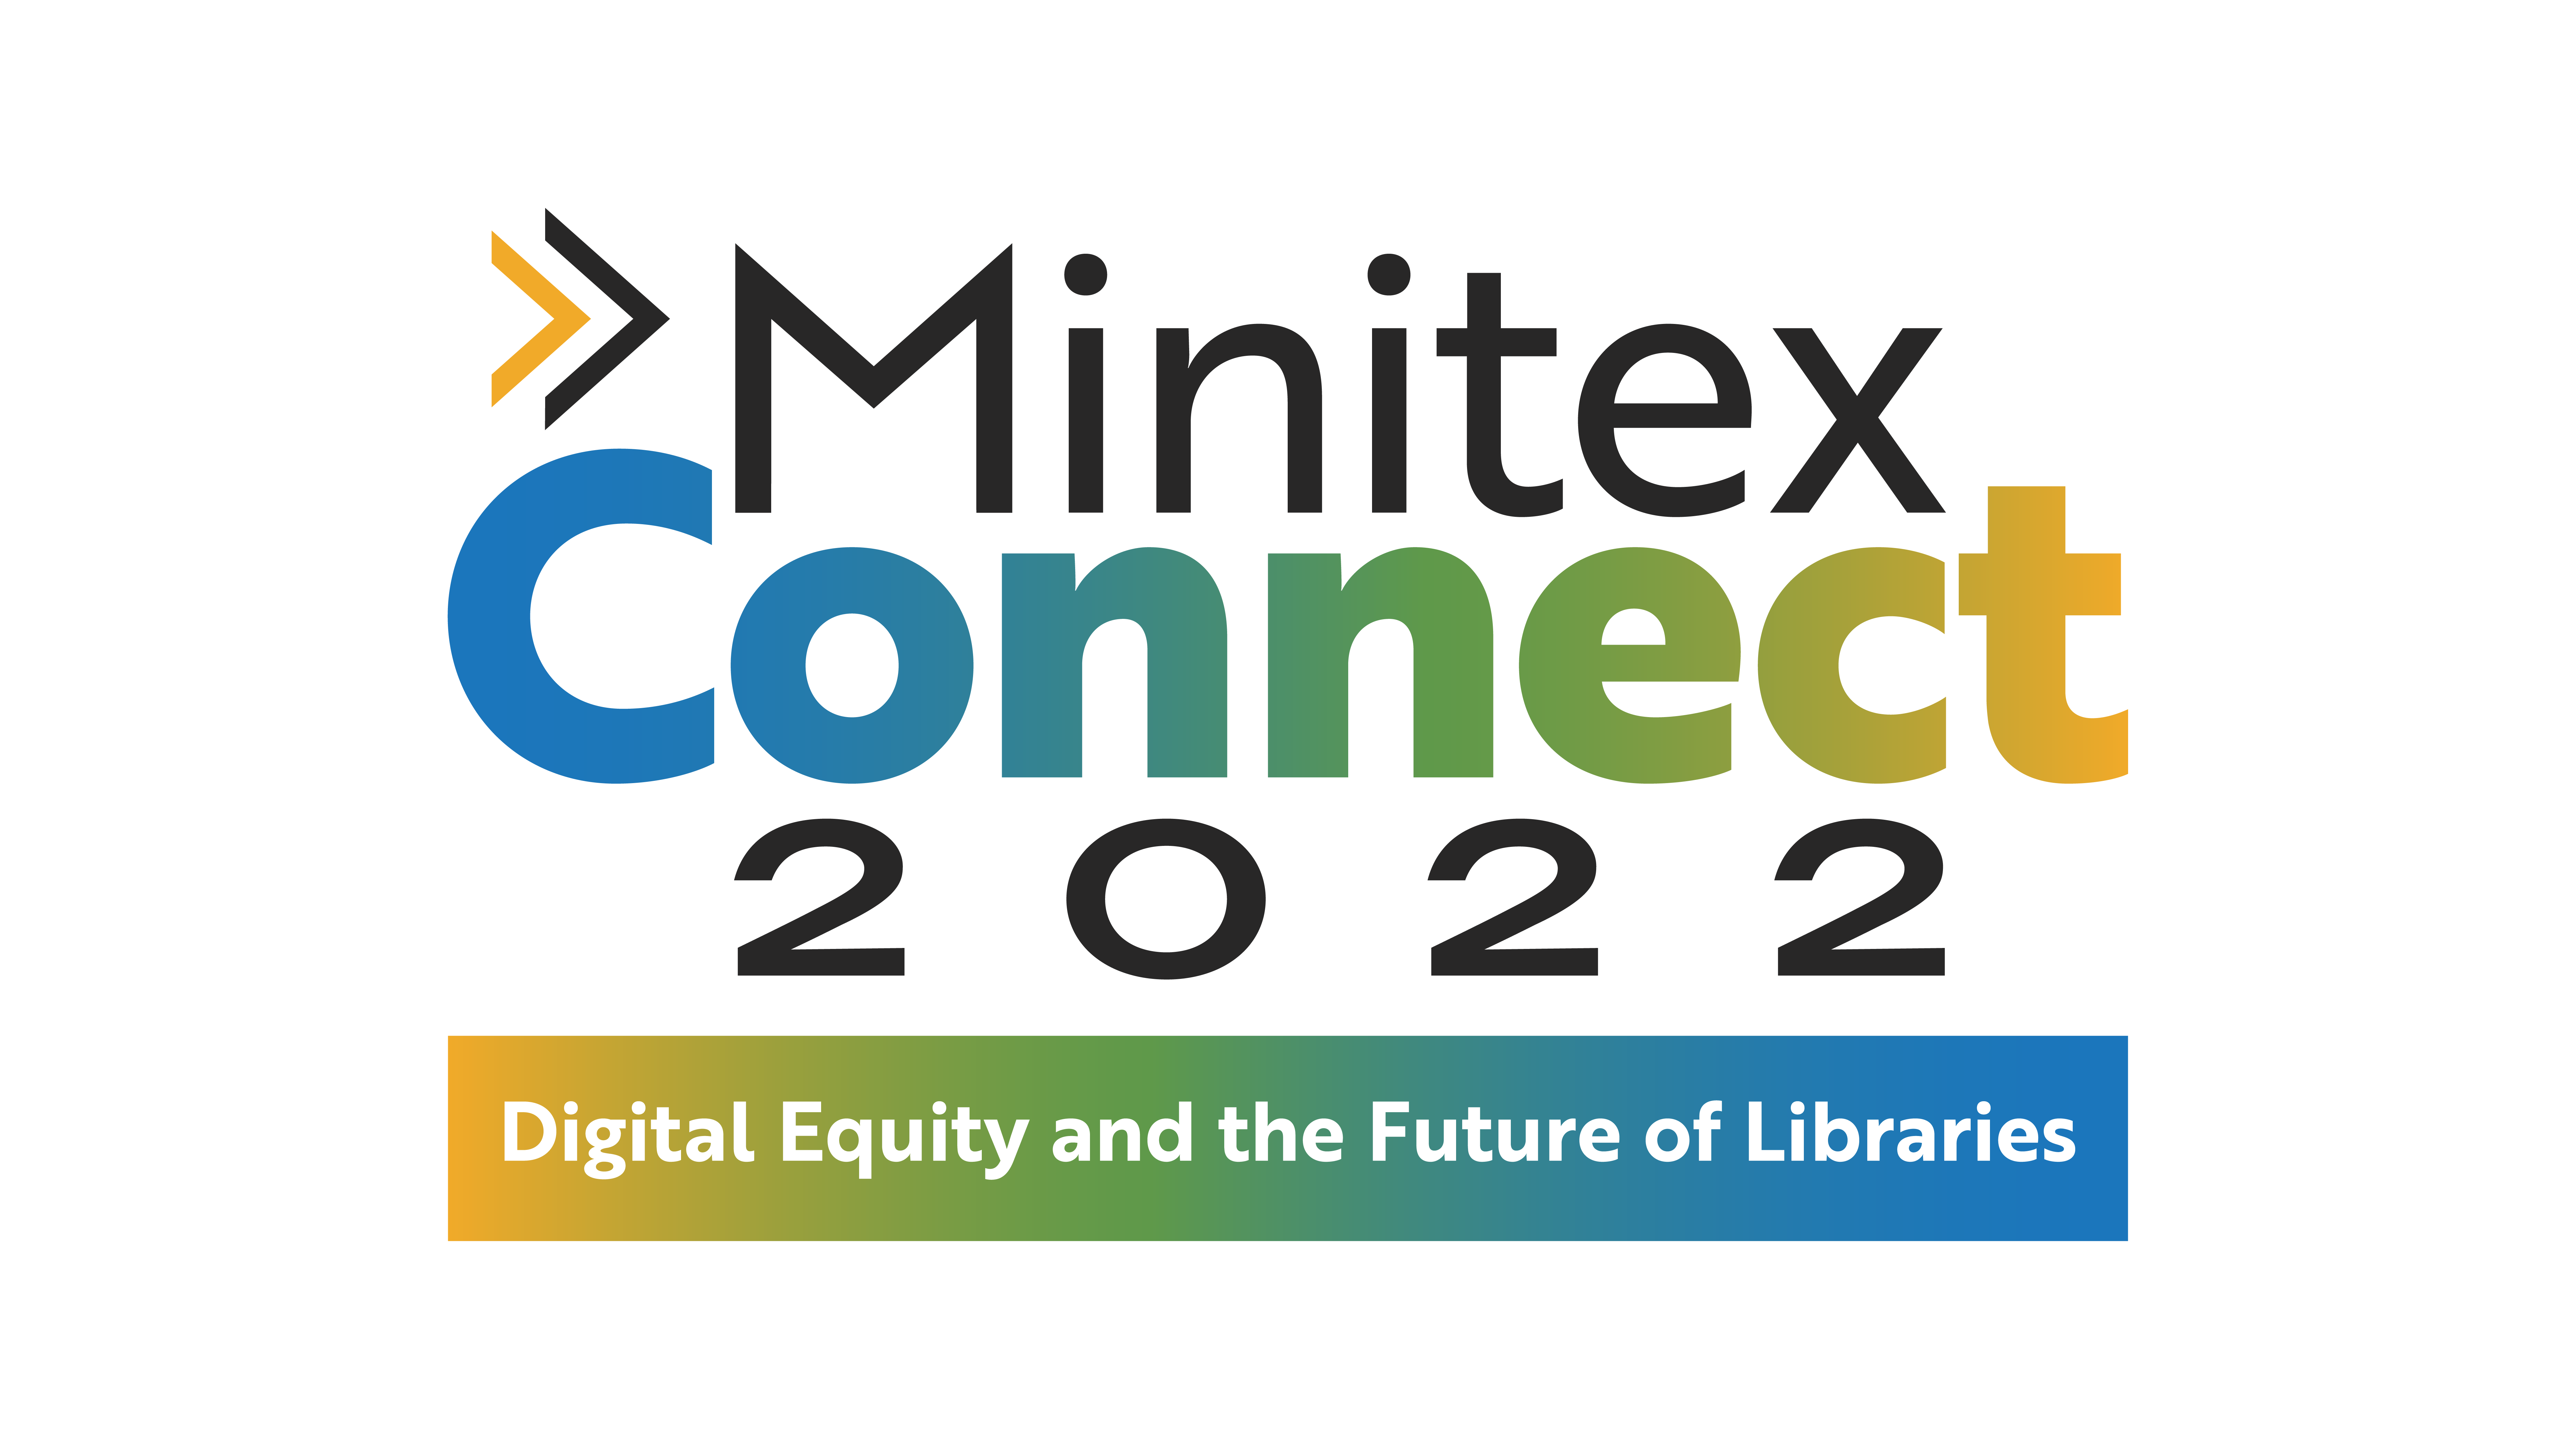 The logo for Minitex Connect 2022. The tagline reads, "Digital Equity and the Future of Libraries."